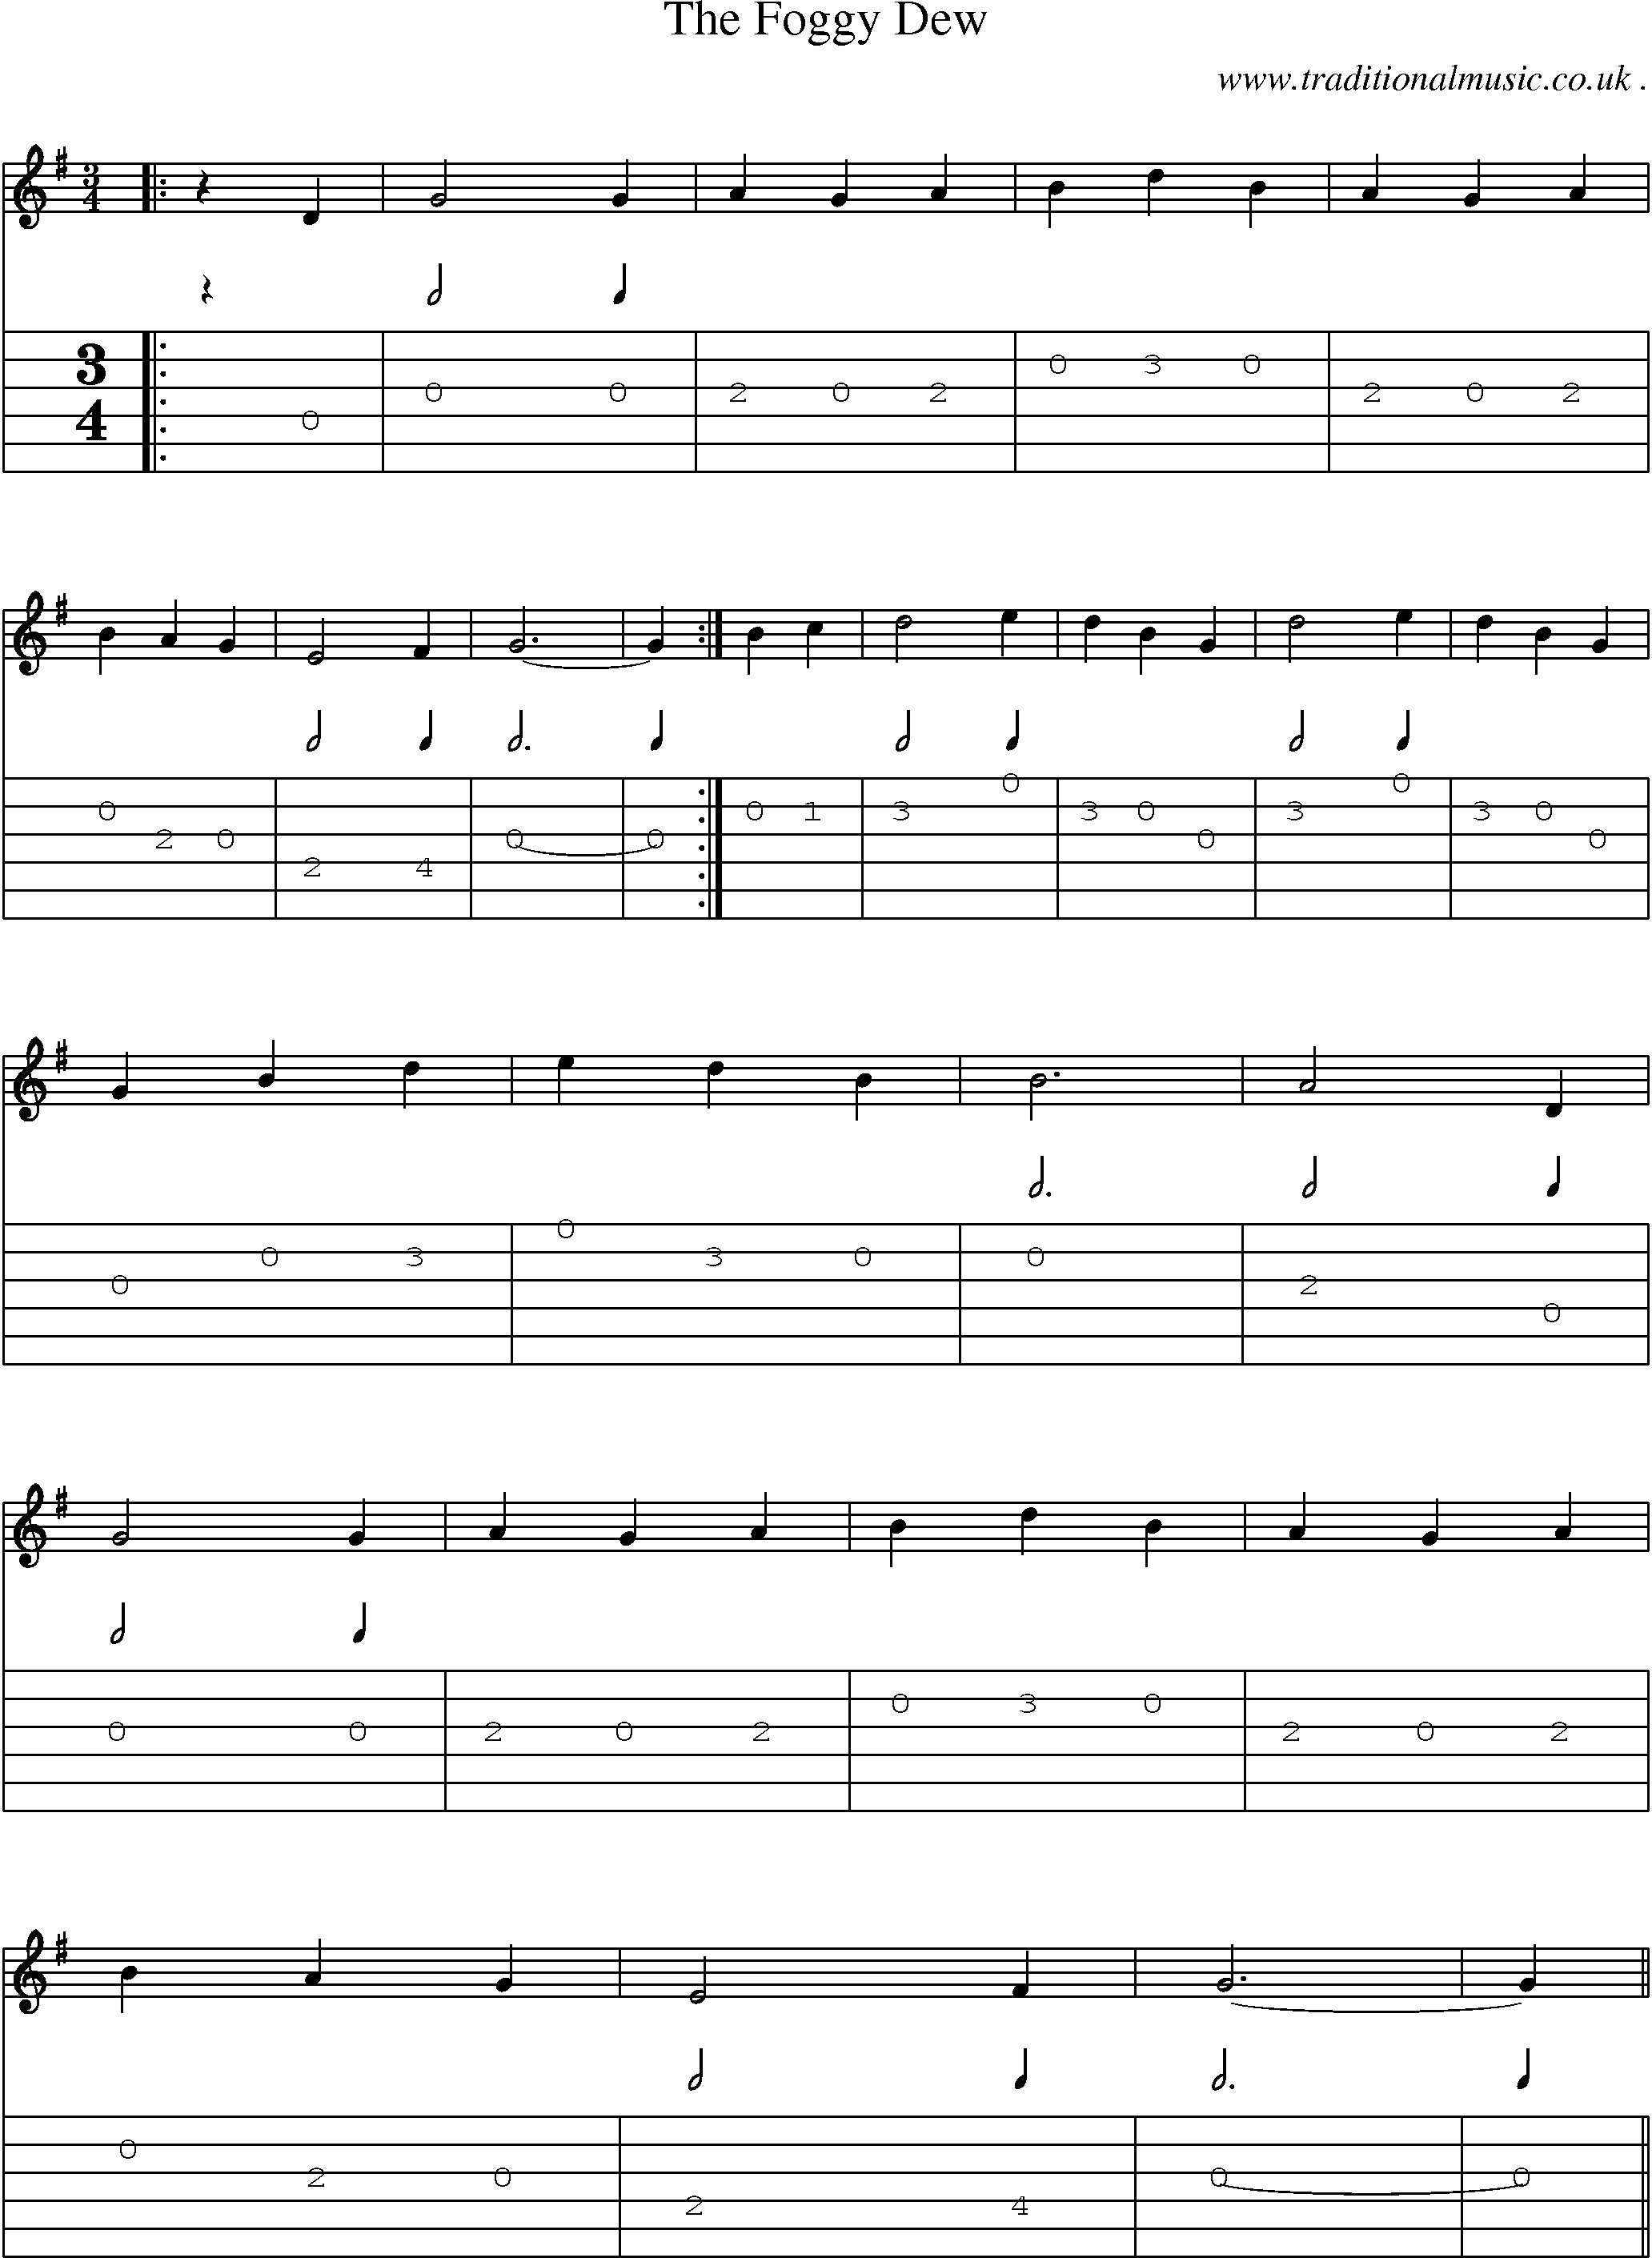 Sheet-Music and Guitar Tabs for The Foggy Dew